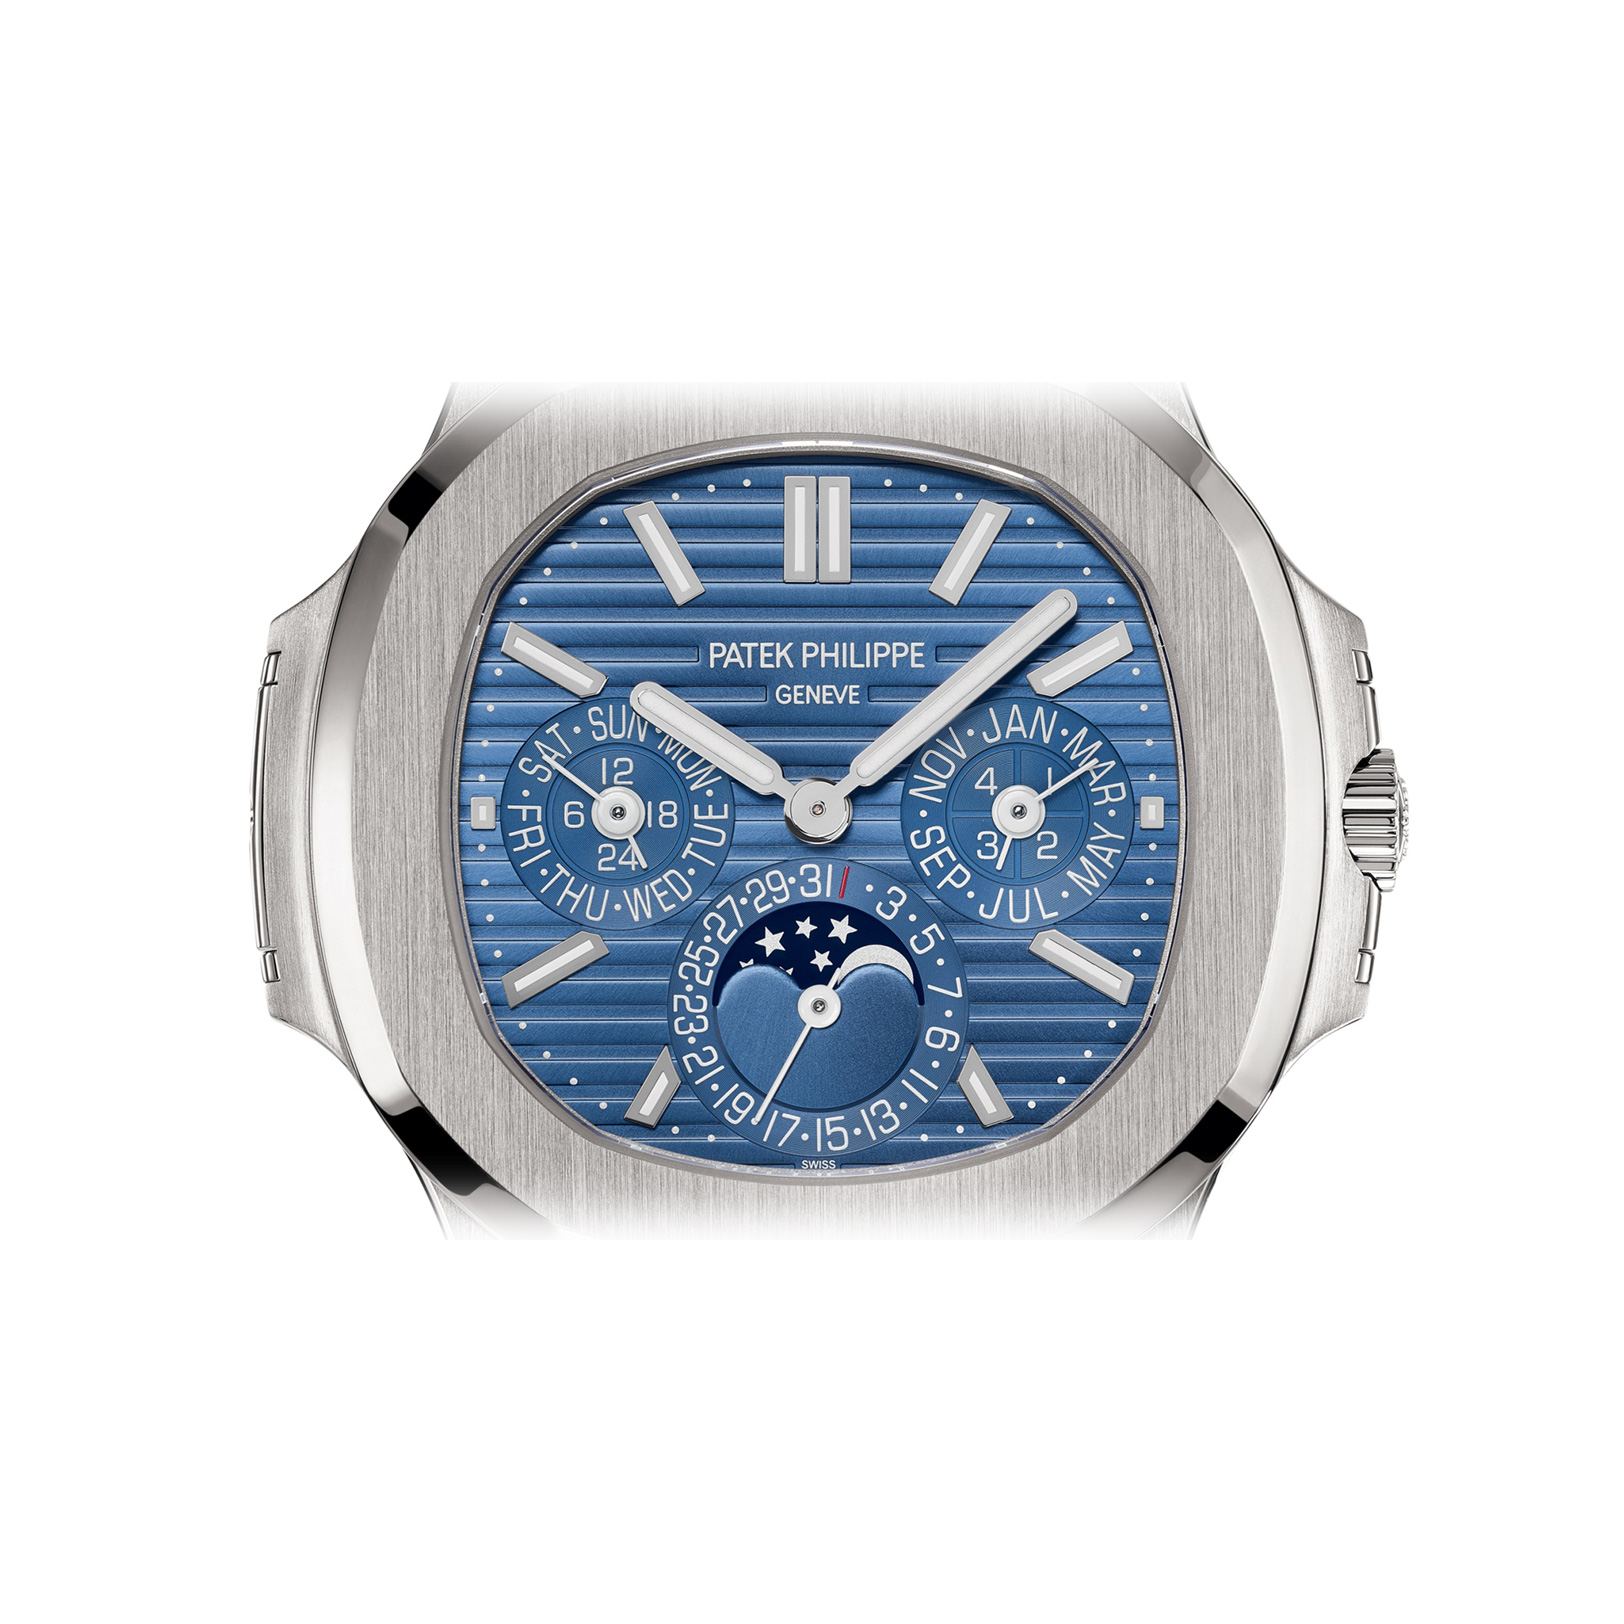 Patek Philippe Nautilus - NEW 2022 - 5740/1G - 001 for $259,888 for sale  from a Trusted Seller on Chrono24